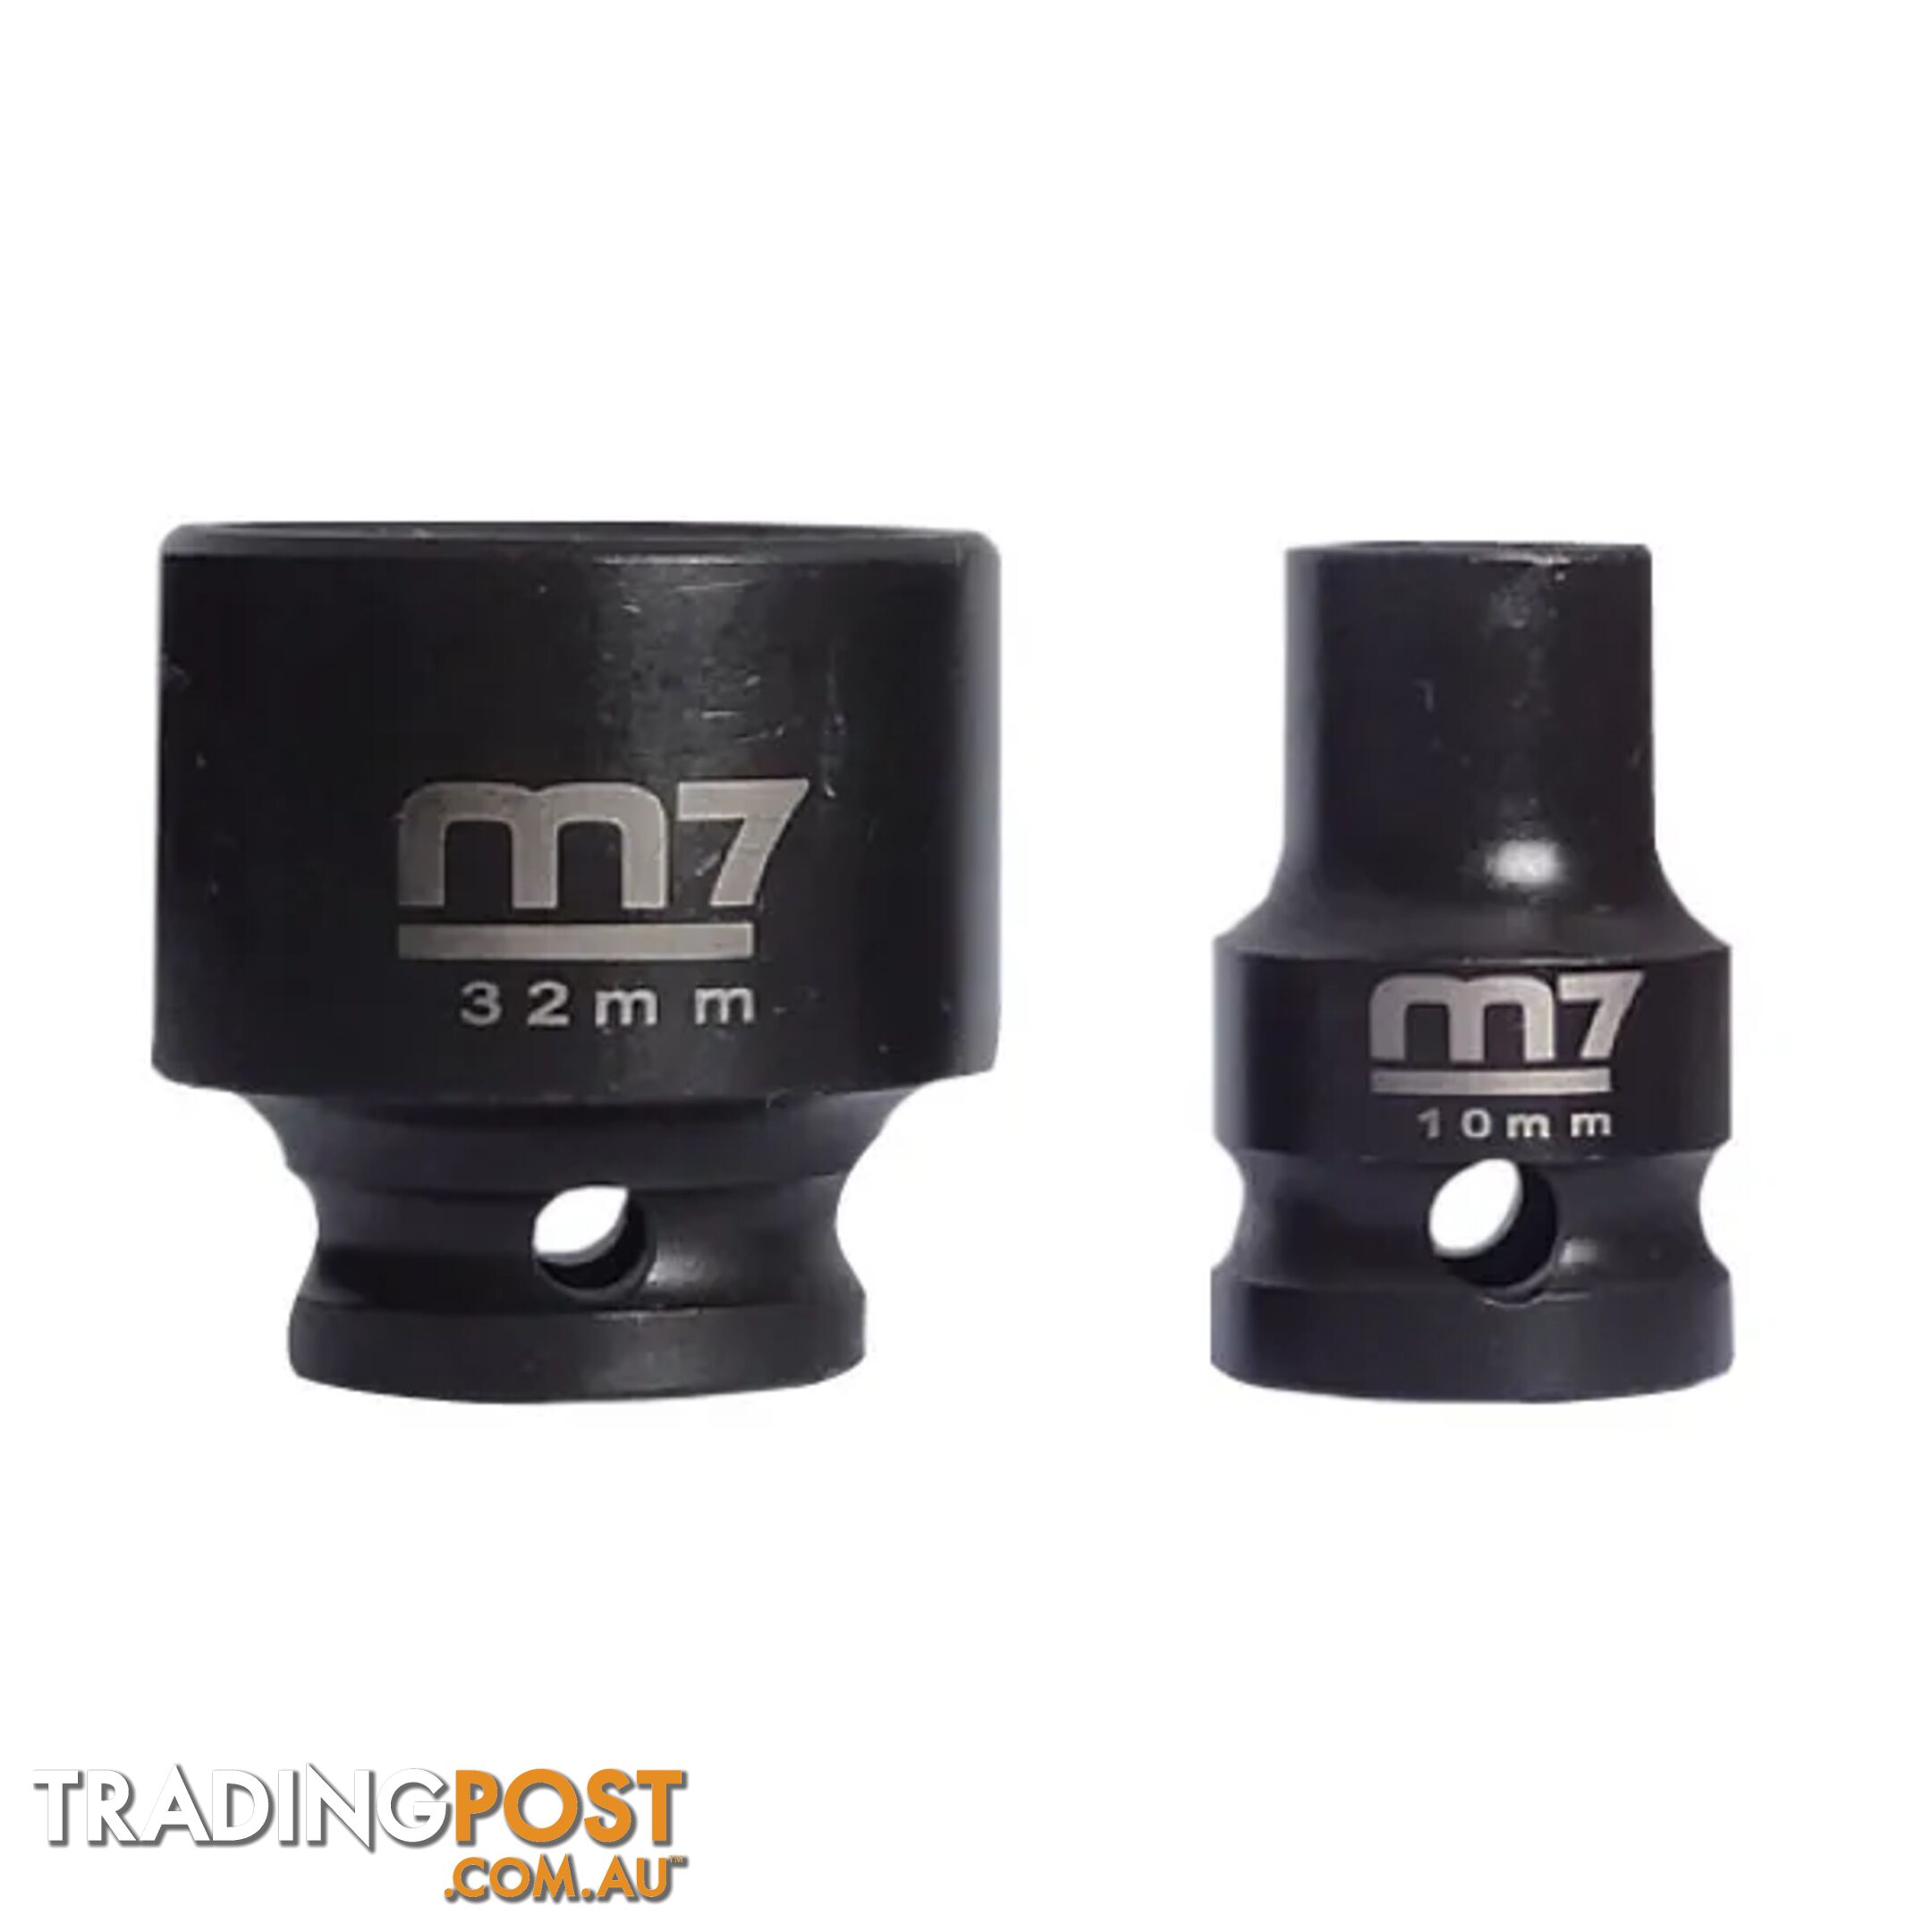 Impact Socket With Hang Tab 1/2" Drive 6 Point 13mm M7 M7-MA411M13